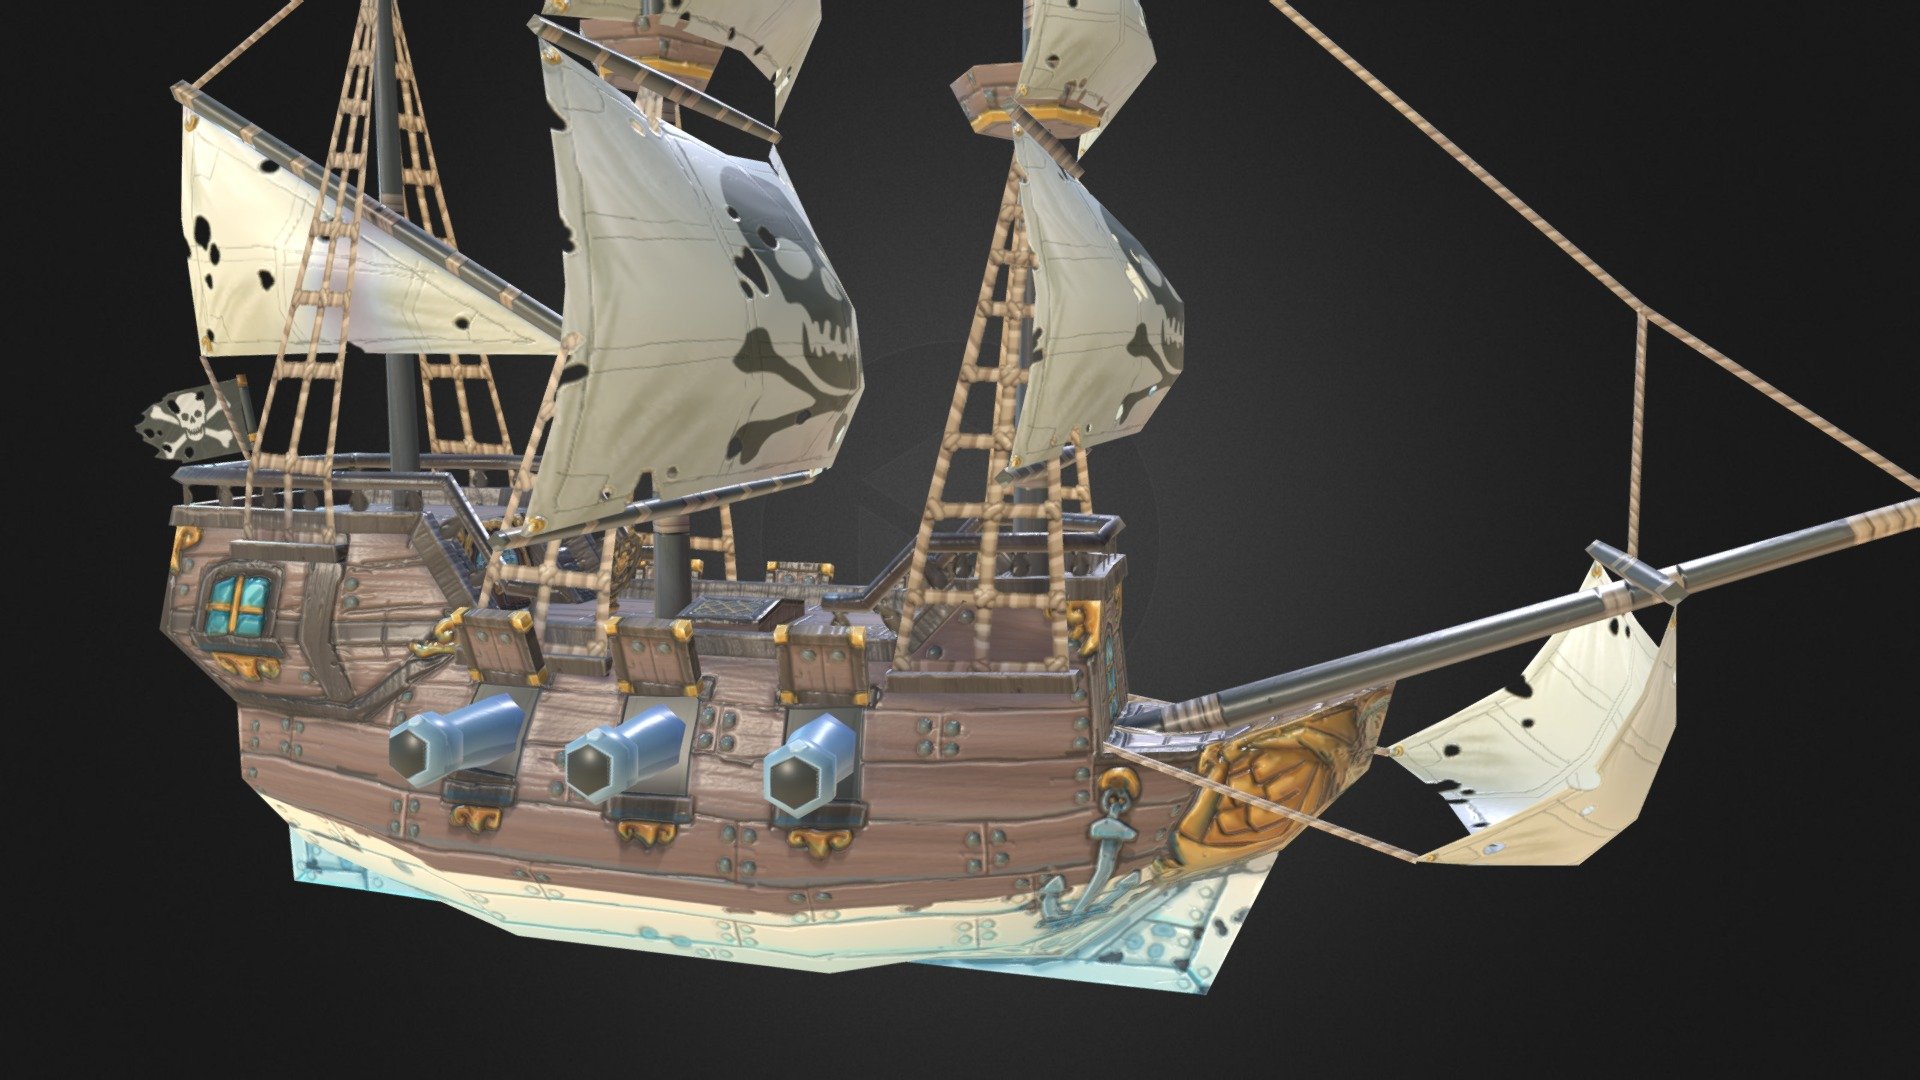 Low poly pirate ship WIP 11hrs to create using - 3ds max - 3d coat -Photosh...